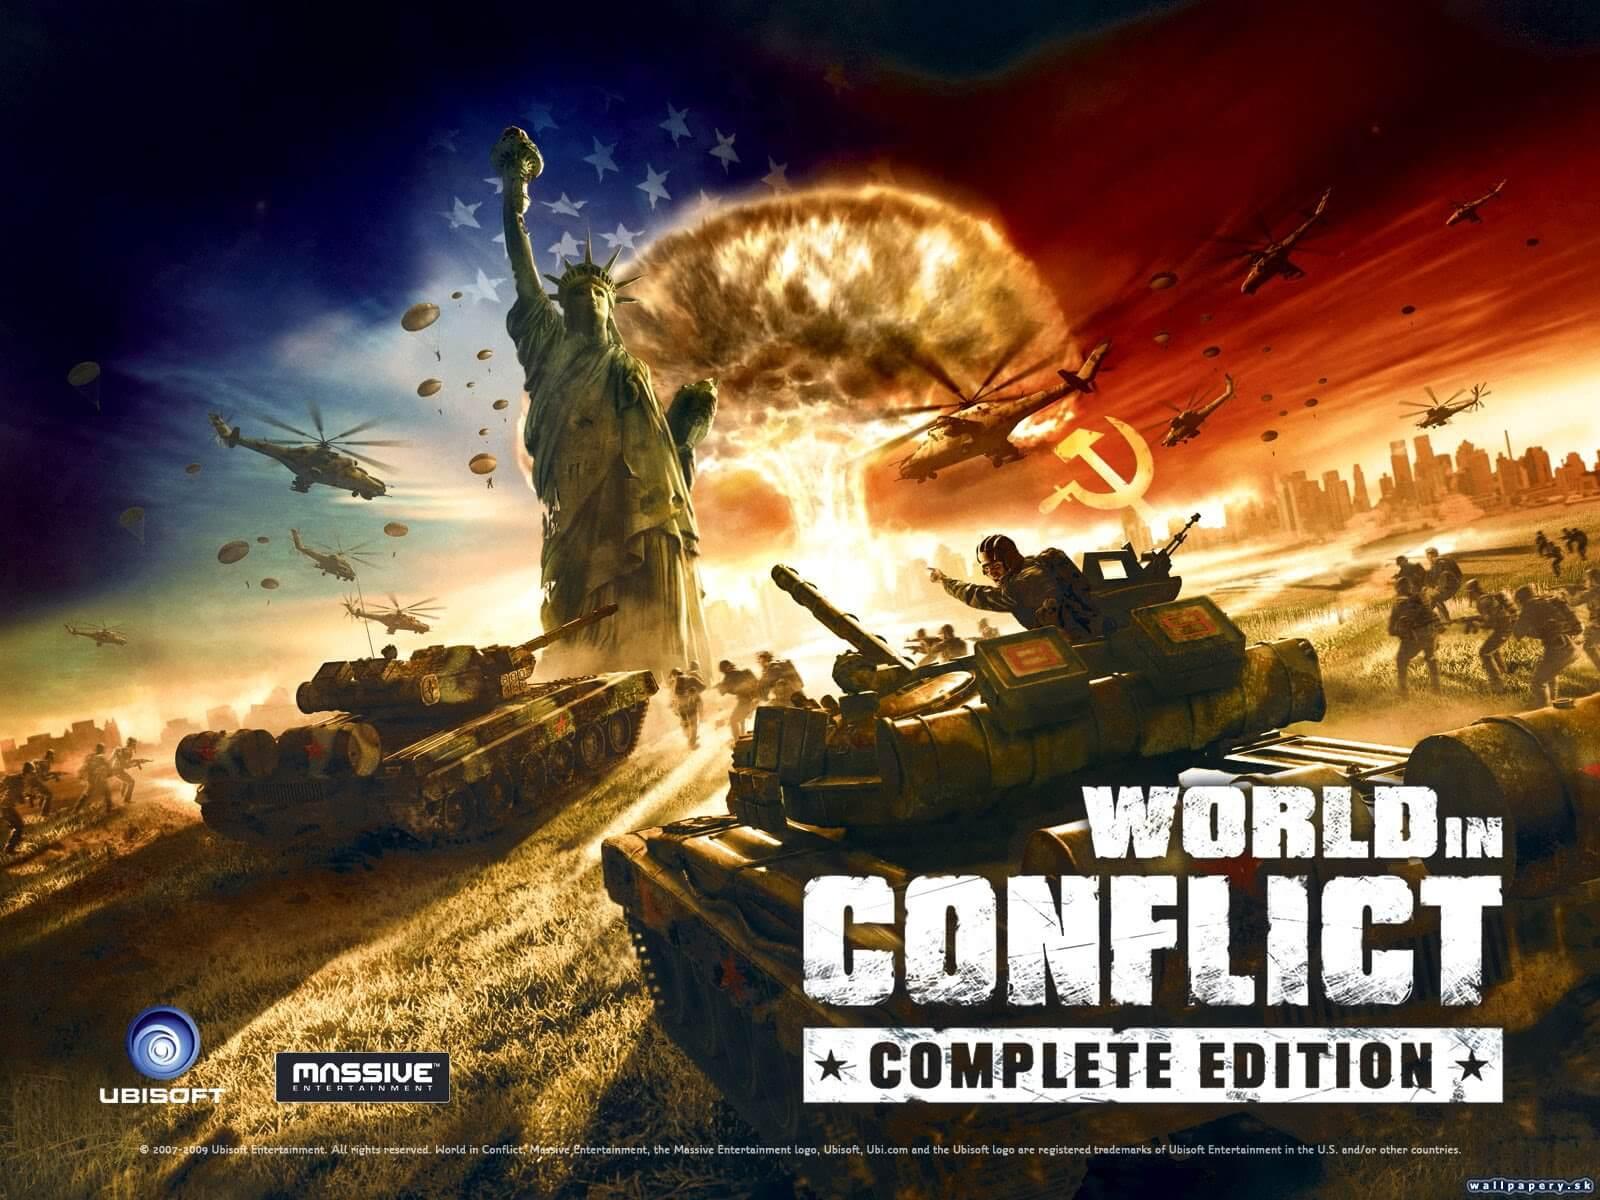 World in Conflict Complete Edition PC Game for $2.49